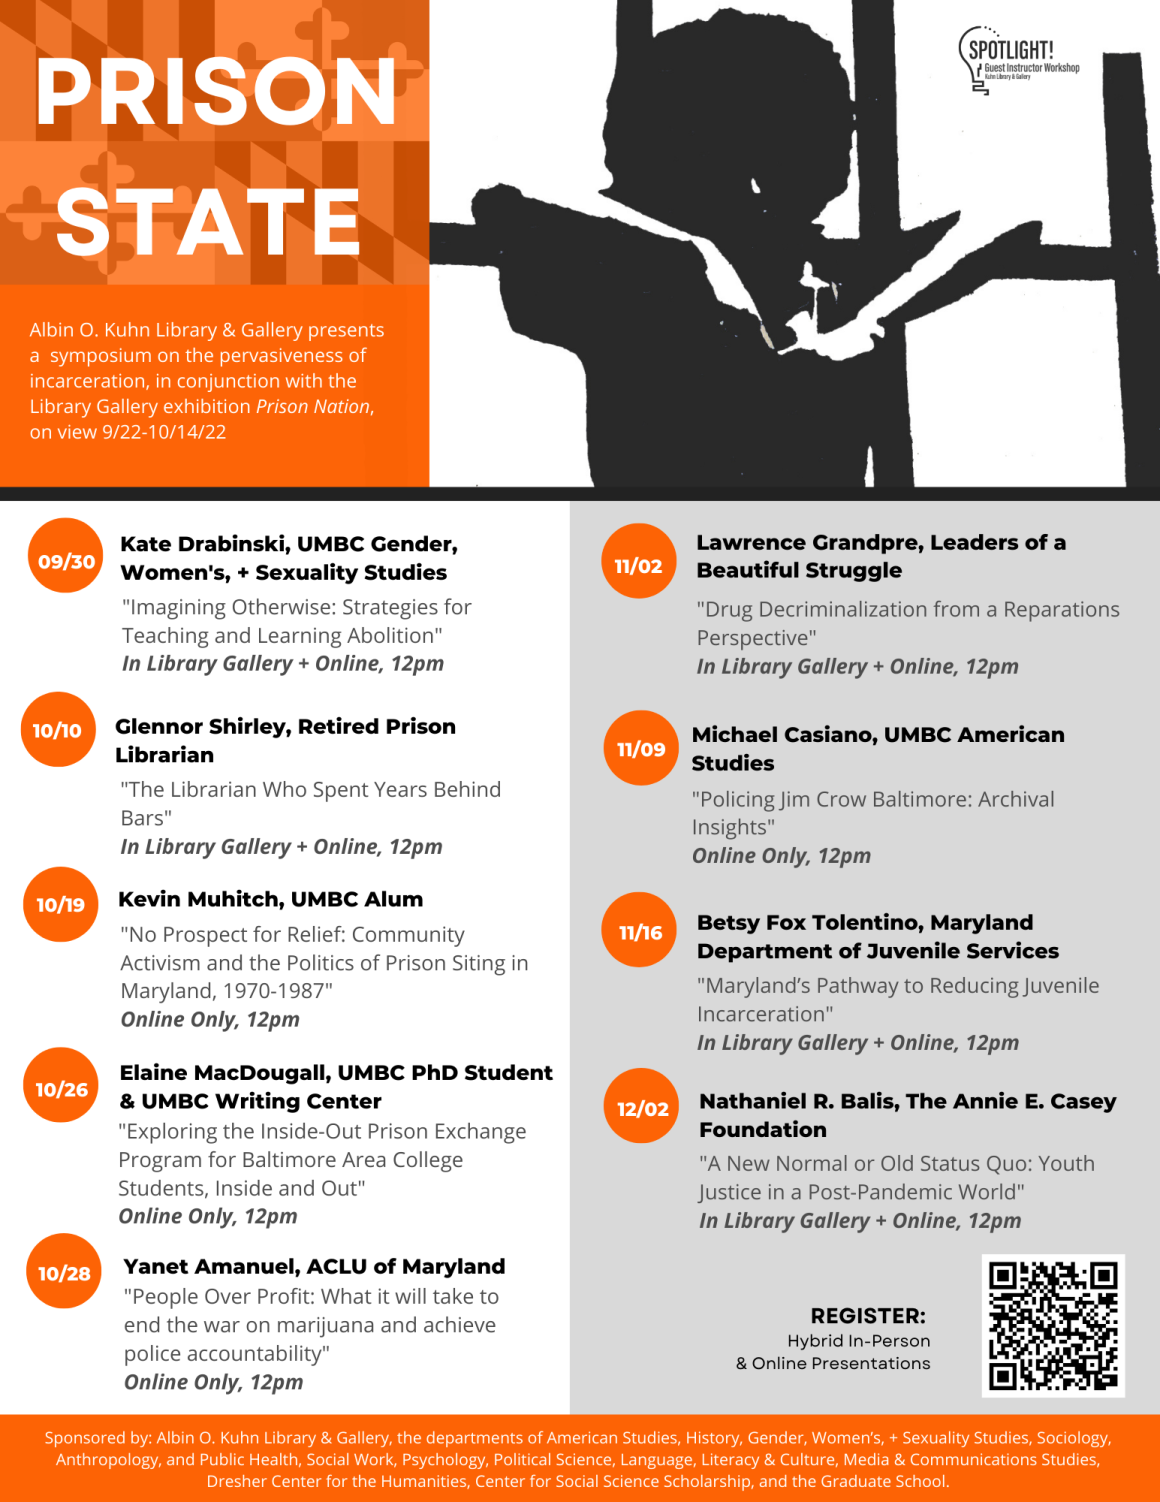 Spotlight! Symposium: Prison State event flyer. The flyer has two columns with information about 9 events.